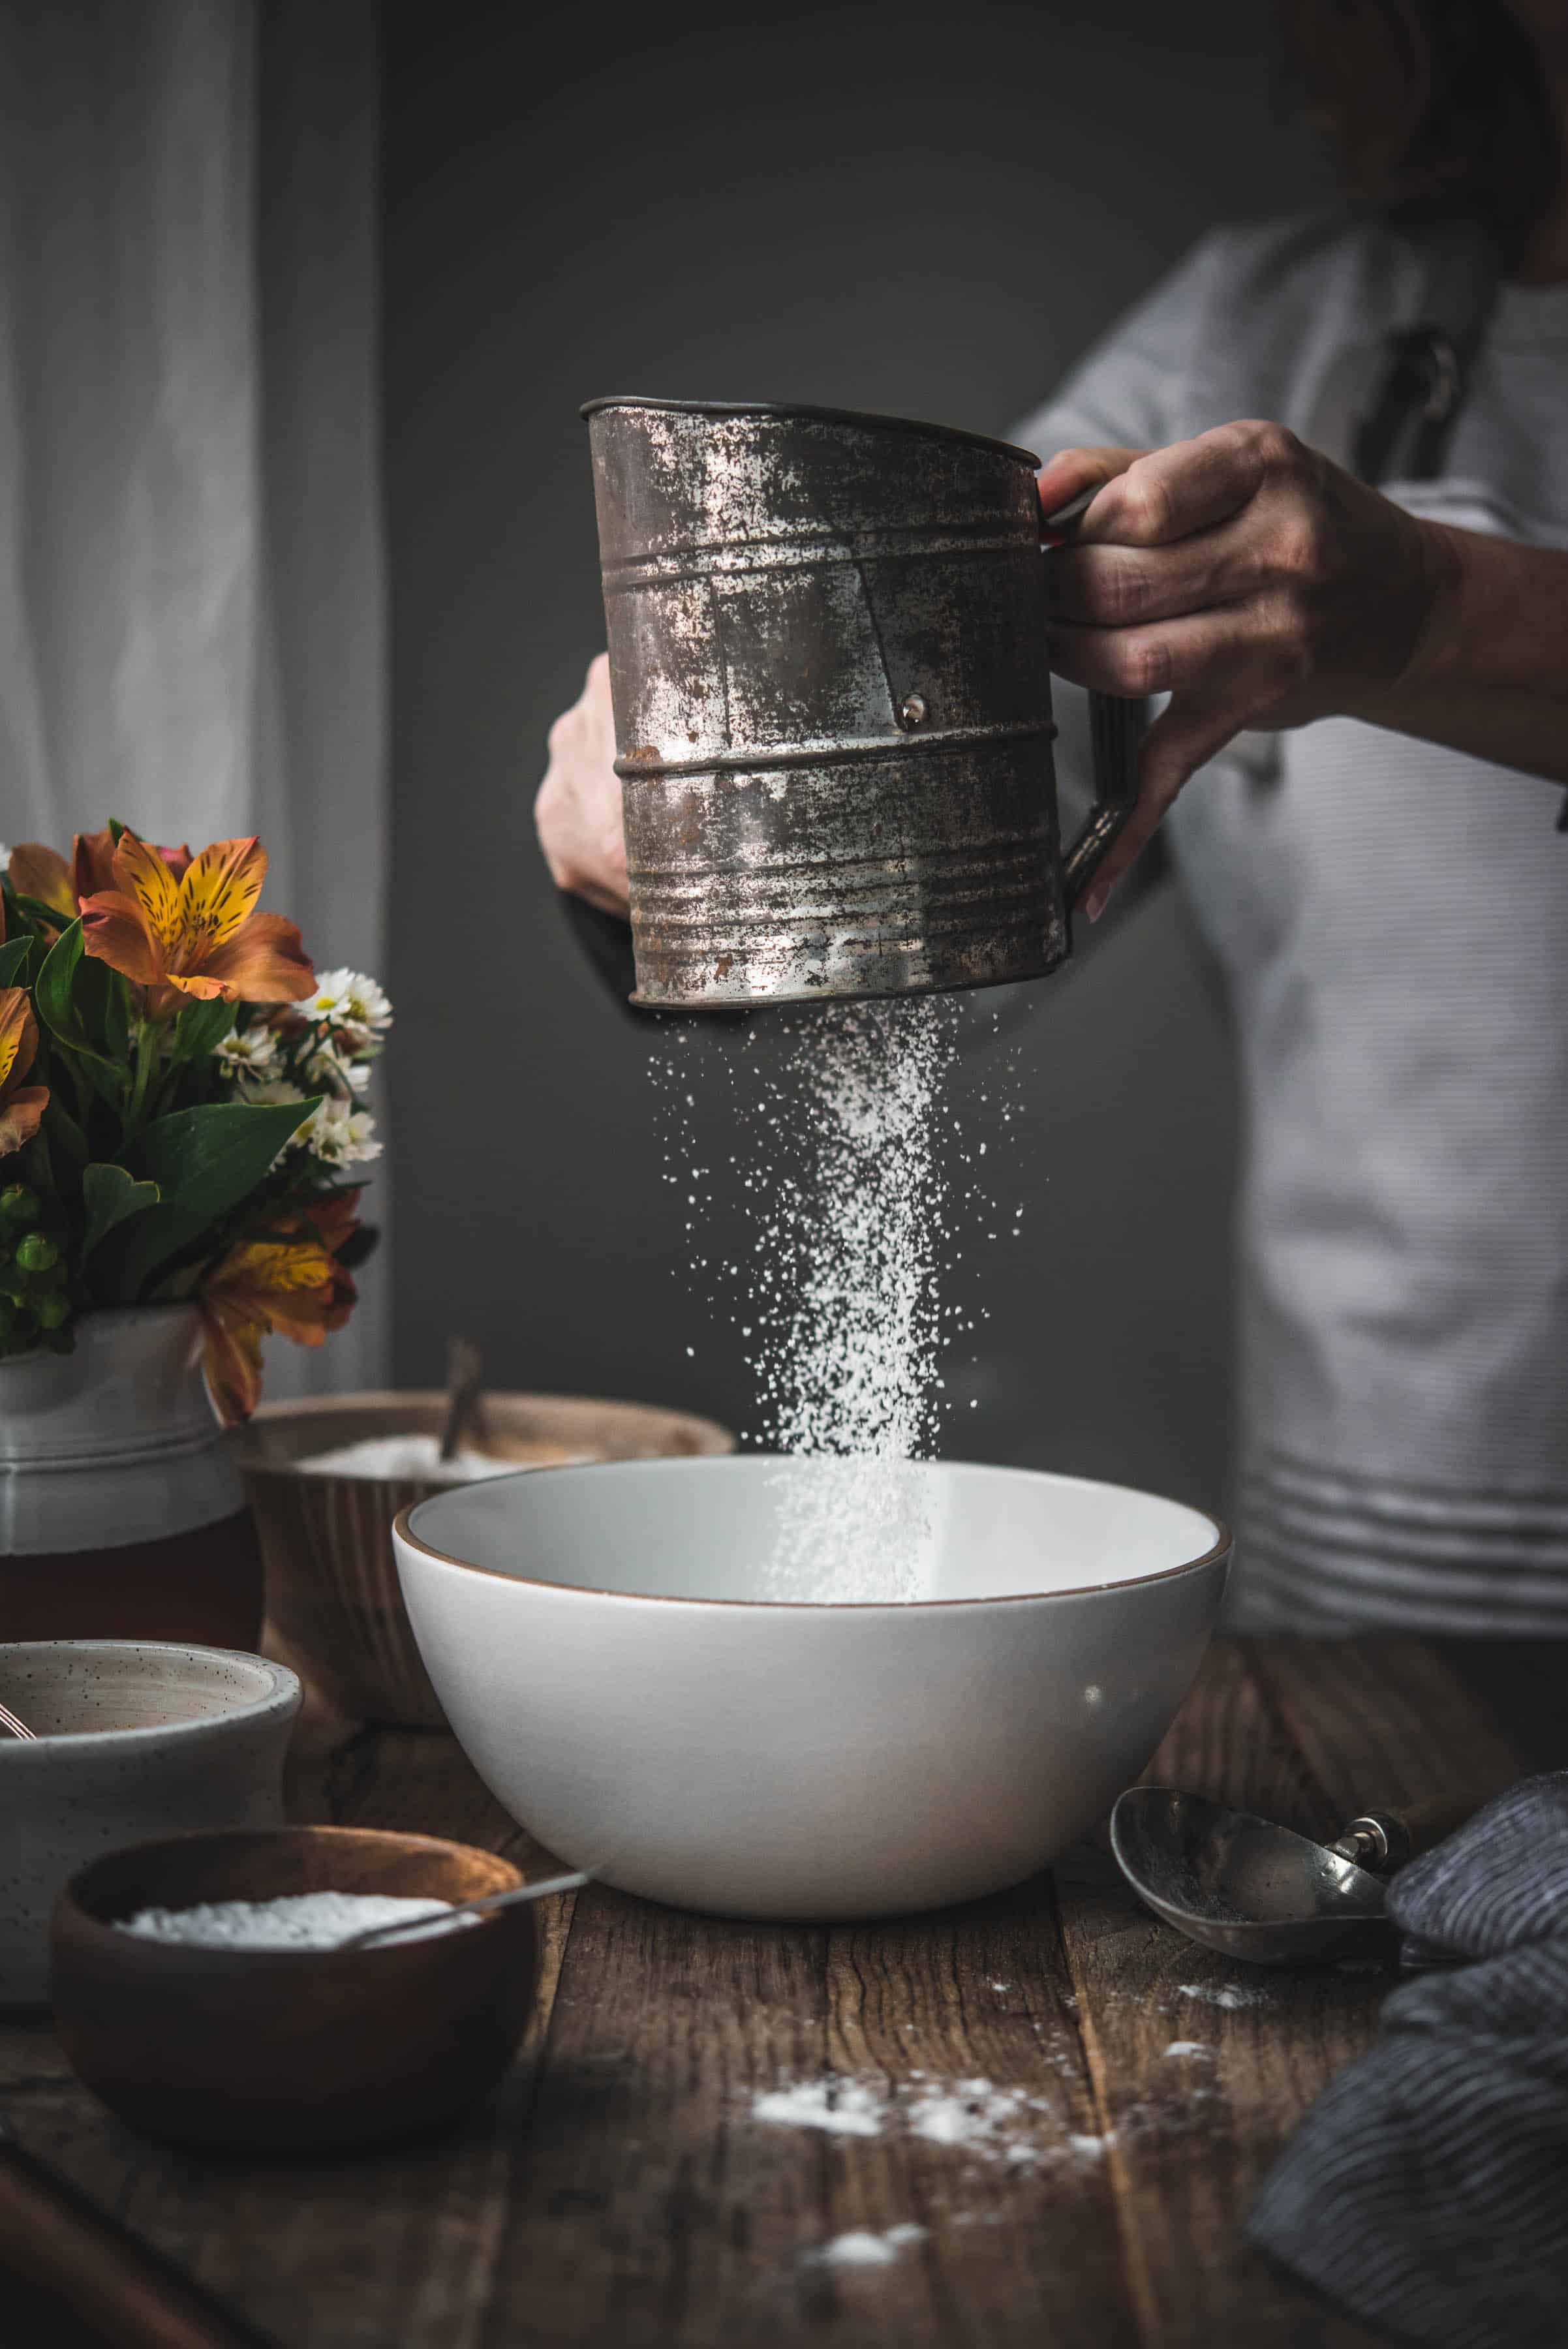 Person sifting gluten free flour from an antique sifter into white bowl on wood table